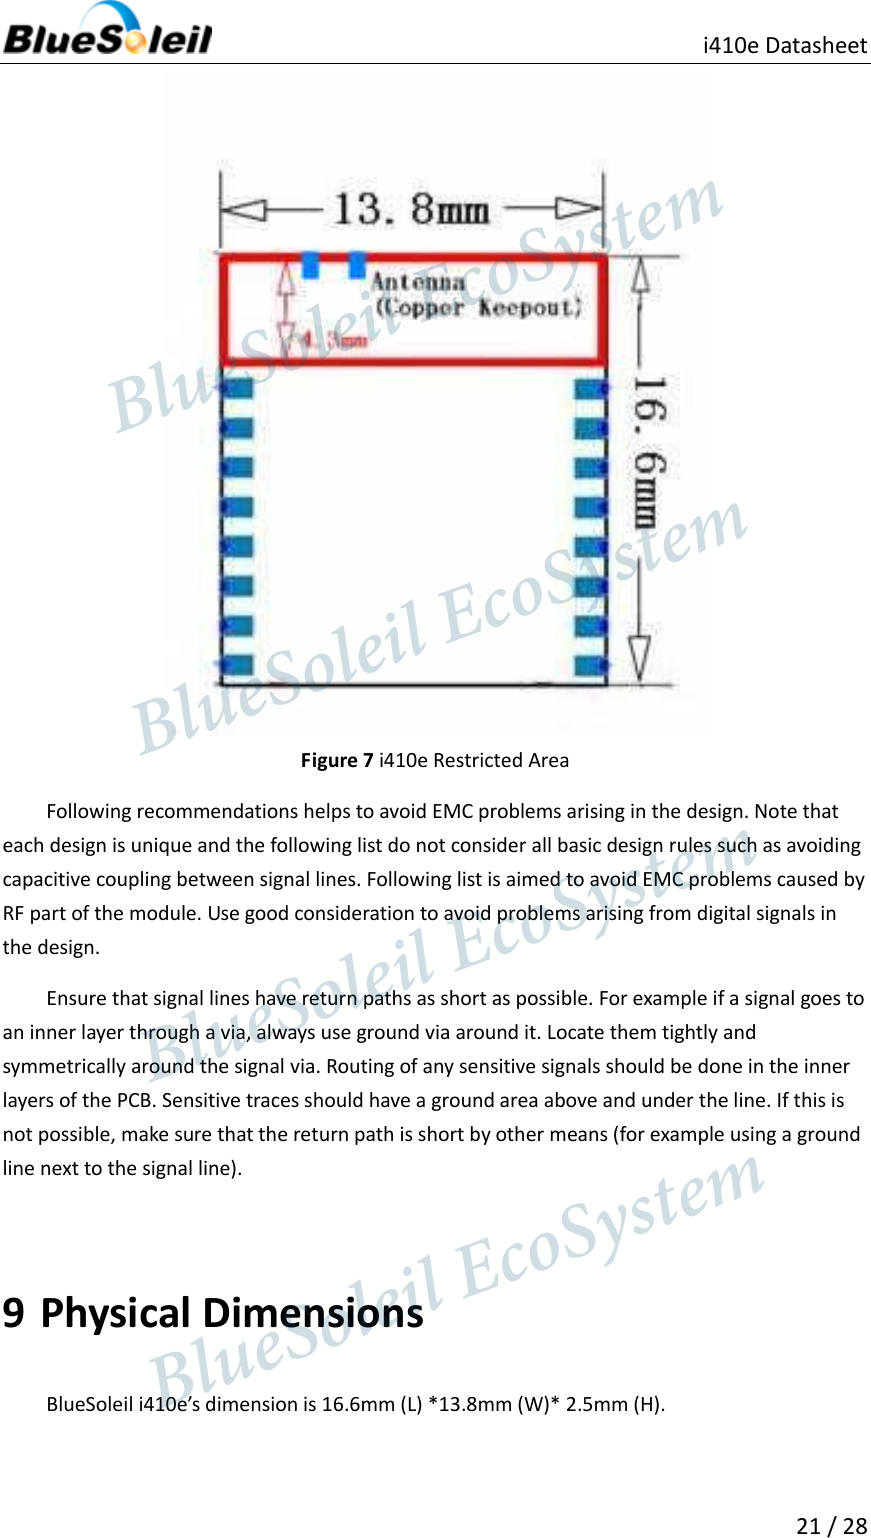                                               i410e Datasheet  21 / 28   Figure 7 i410e Restricted Area Following recommendations helps to avoid EMC problems arising in the design. Note that each design is unique and the following list do not consider all basic design rules such as avoiding capacitive coupling between signal lines. Following list is aimed to avoid EMC problems caused by RF part of the module. Use good consideration to avoid problems arising from digital signals in the design. Ensure that signal lines have return paths as short as possible. For example if a signal goes to an inner layer through a via, always use ground via around it. Locate them tightly and symmetrically around the signal via. Routing of any sensitive signals should be done in the inner layers of the PCB. Sensitive traces should have a ground area above and under the line. If this is not possible, make sure that the return path is short by other means (for example using a ground line next to the signal line).  9 Physical Dimensions BlueSoleil i410e’s dimension is 16.6mm (L) *13.8mm (W)* 2.5mm (H).                  BlueSoleil EcoSystem            BlueSoleil EcoSystem      BlueSoleil EcoSystemBlueSoleil EcoSystem